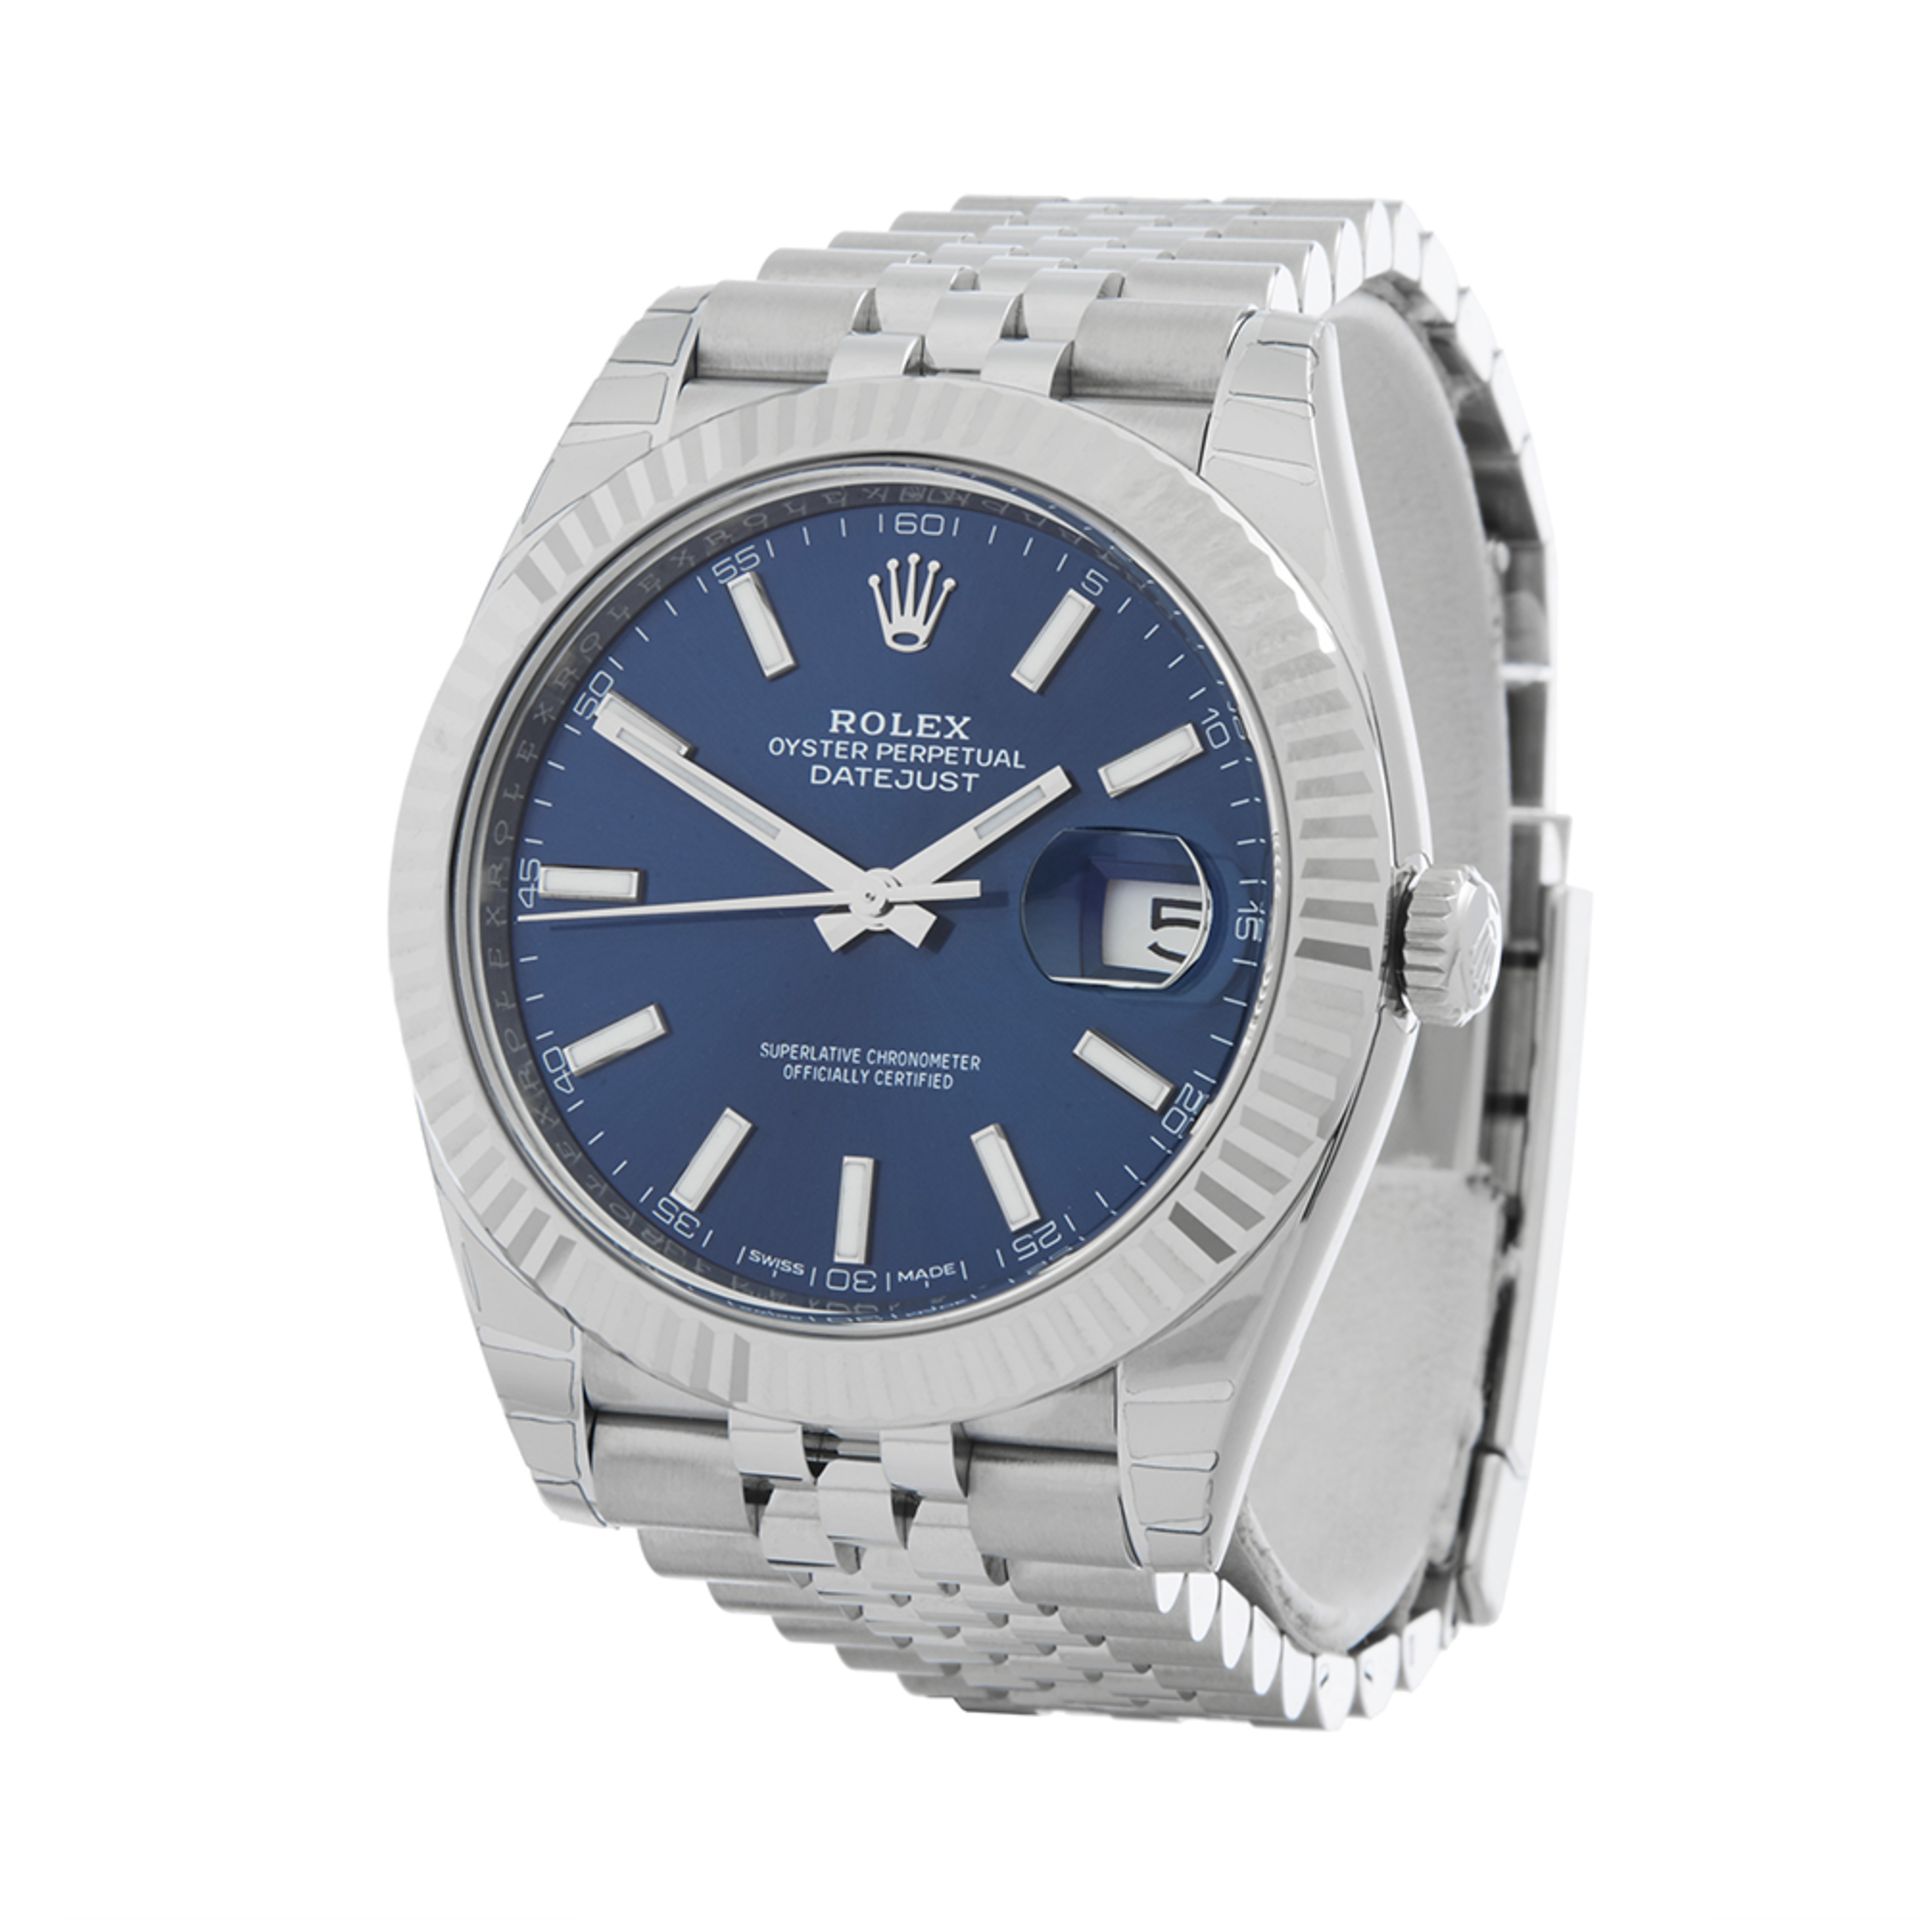 Rolex Datejust 41 Stainless Steel - Z511199P3 - Image 3 of 8